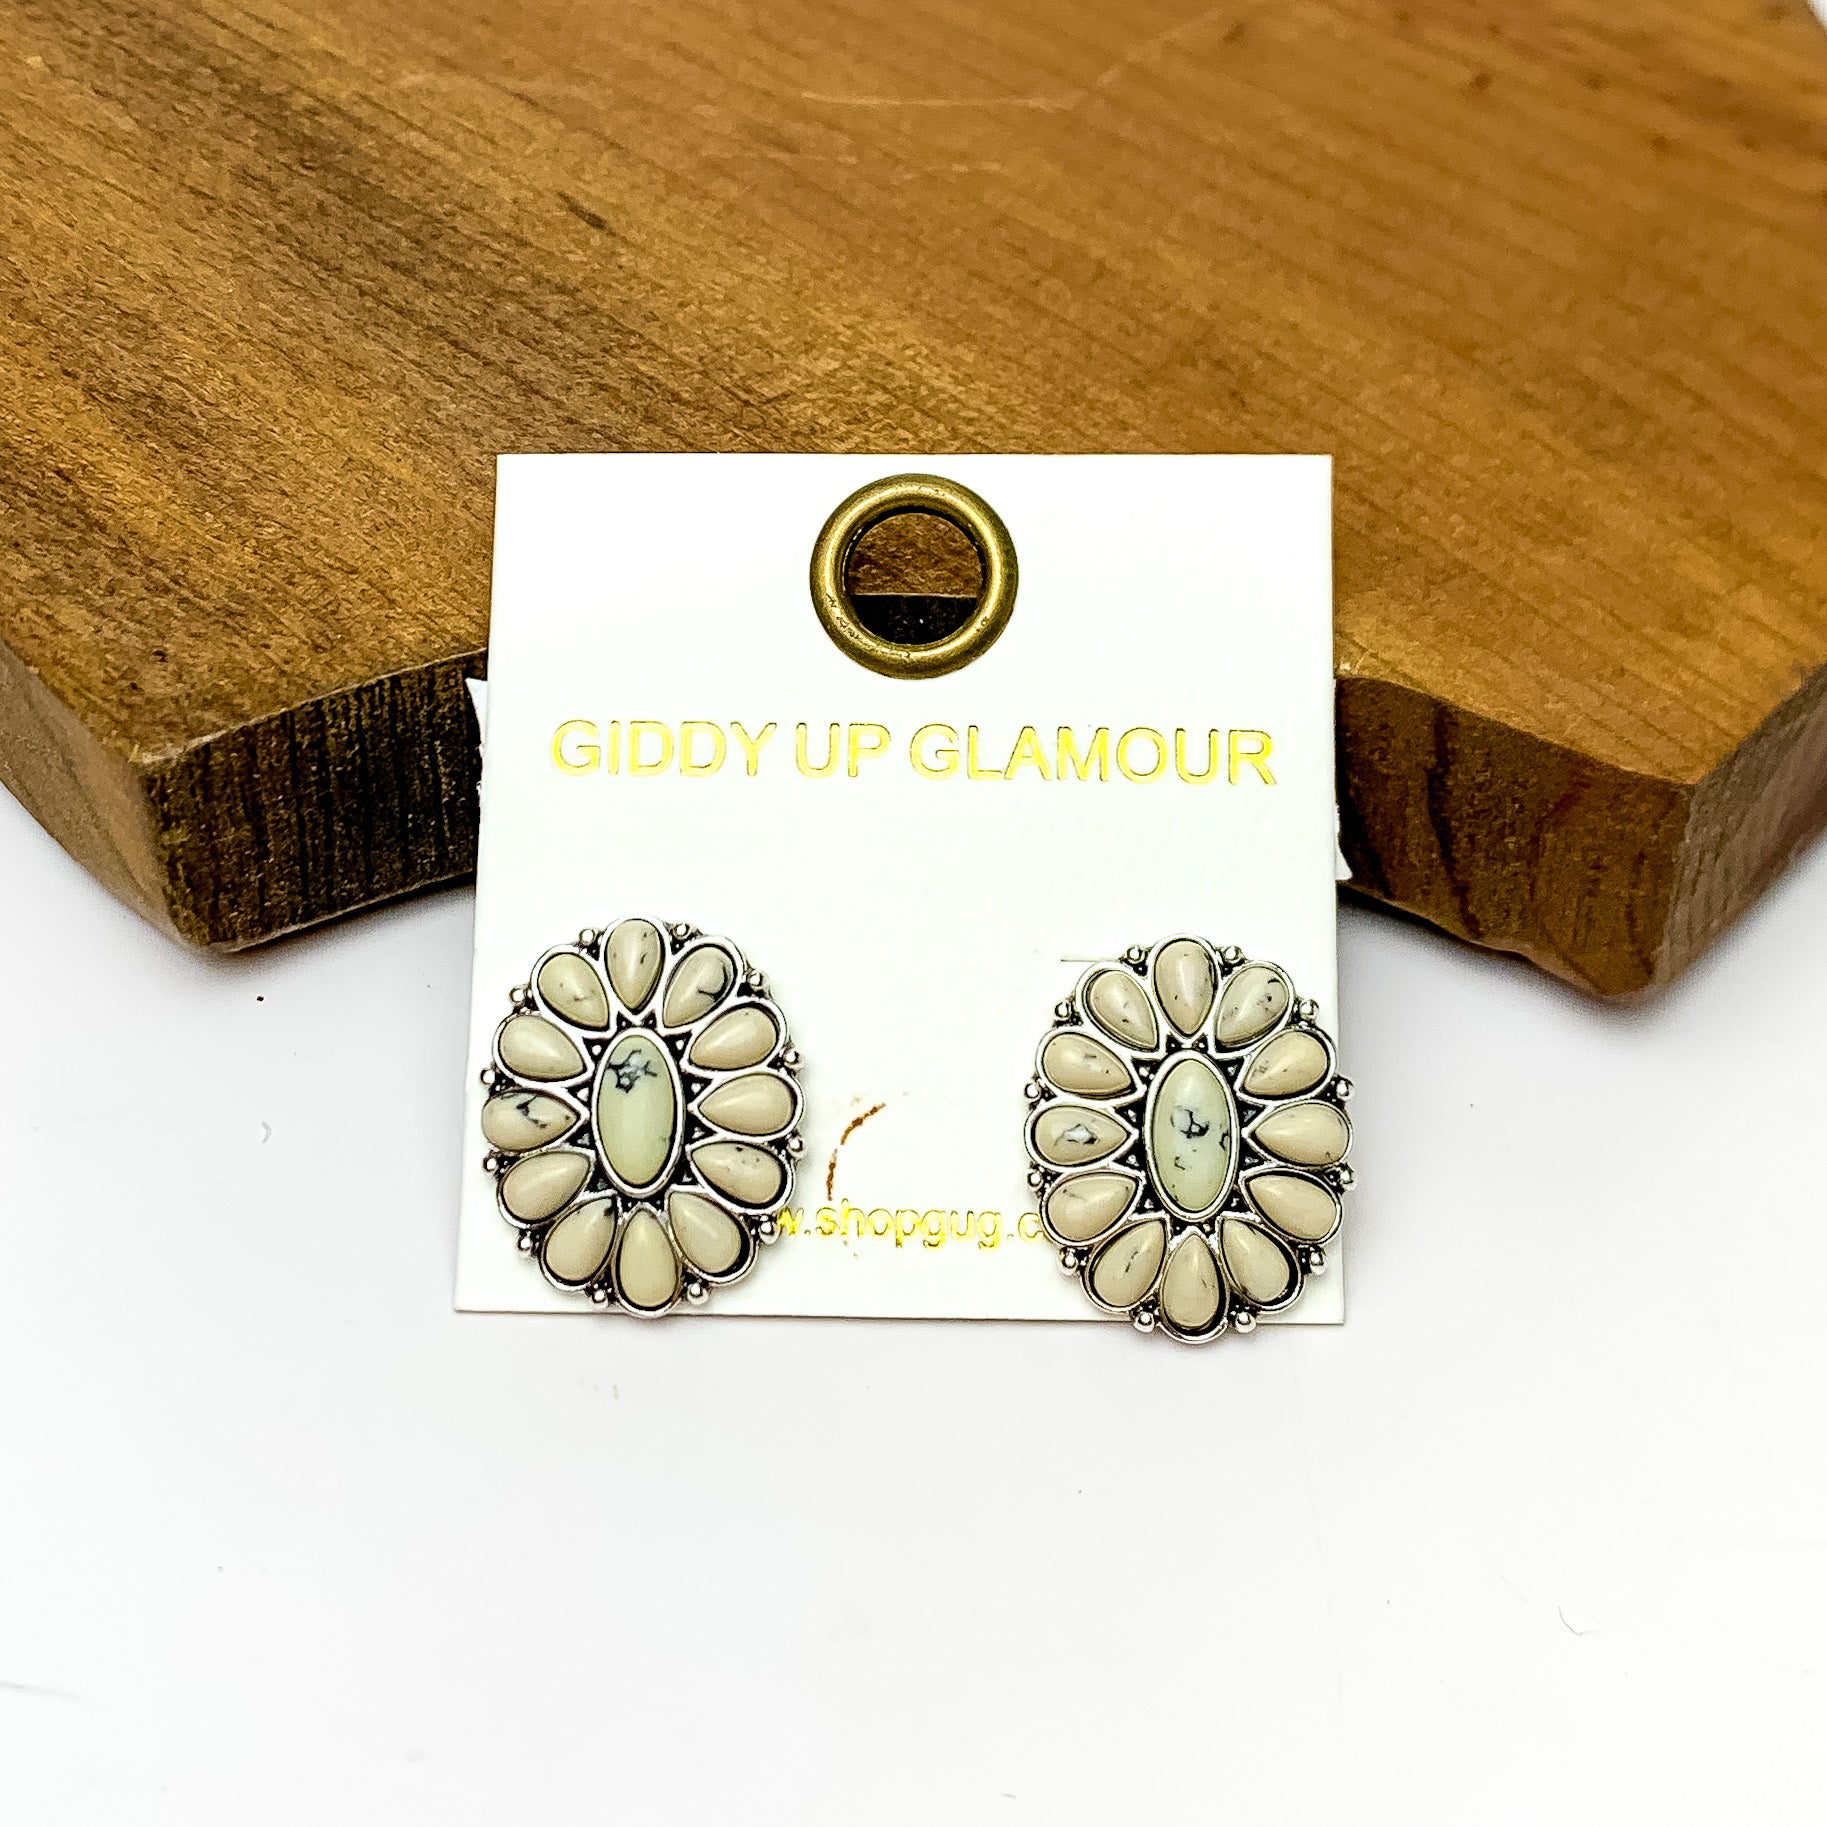 Silver Tone Concho Cluster Oval Earrings in Ivory. Pictured on a white background with the earrings laying against a wood piece.